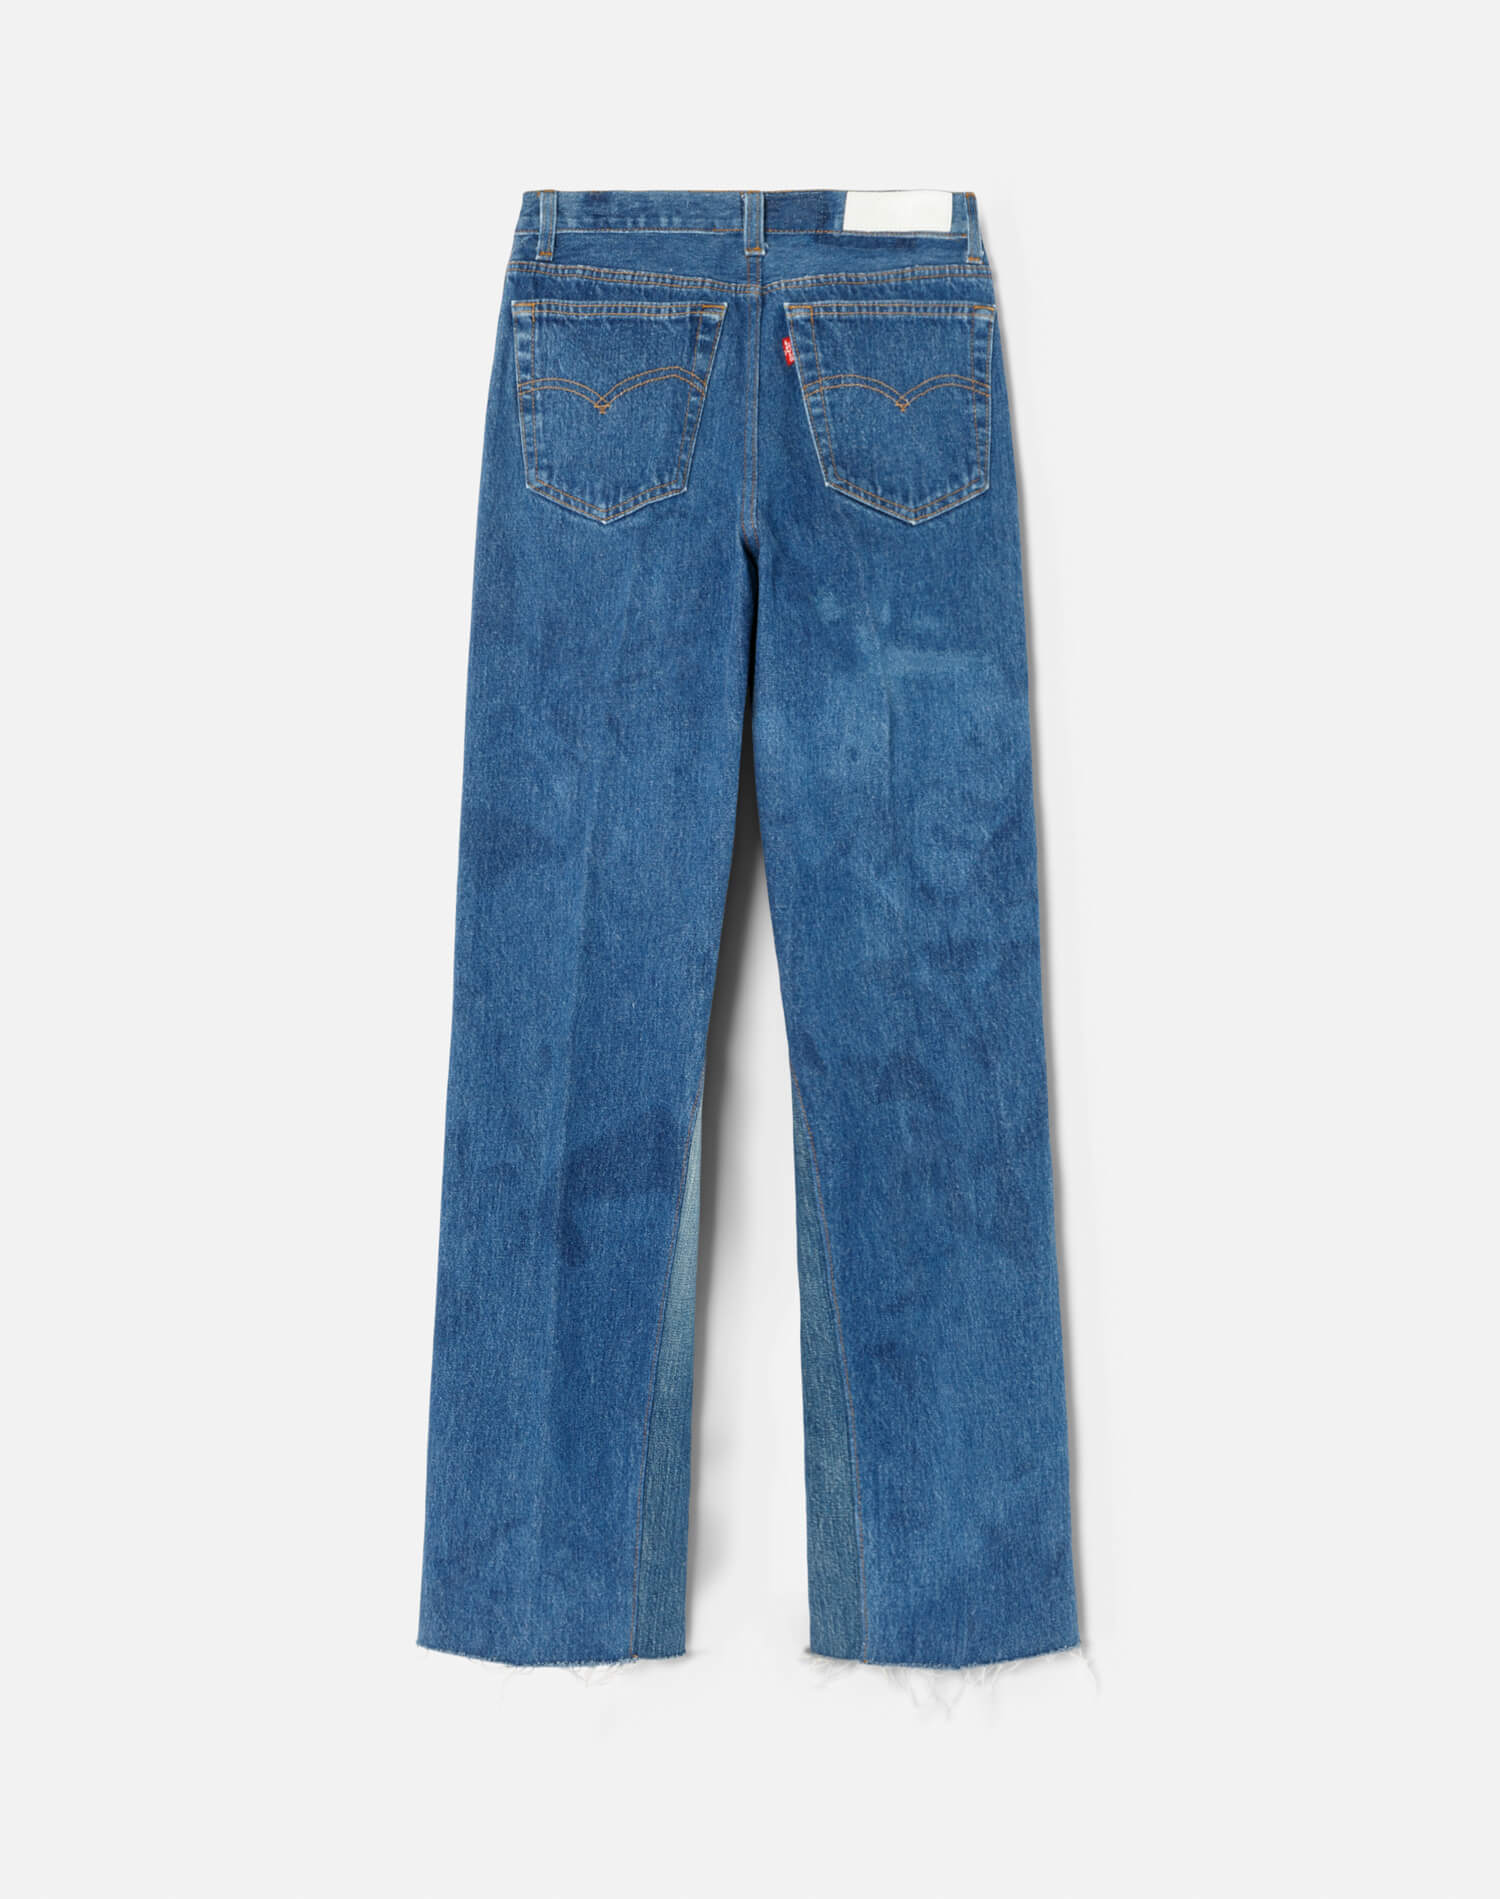 RE/DONE Levi's | Size 25